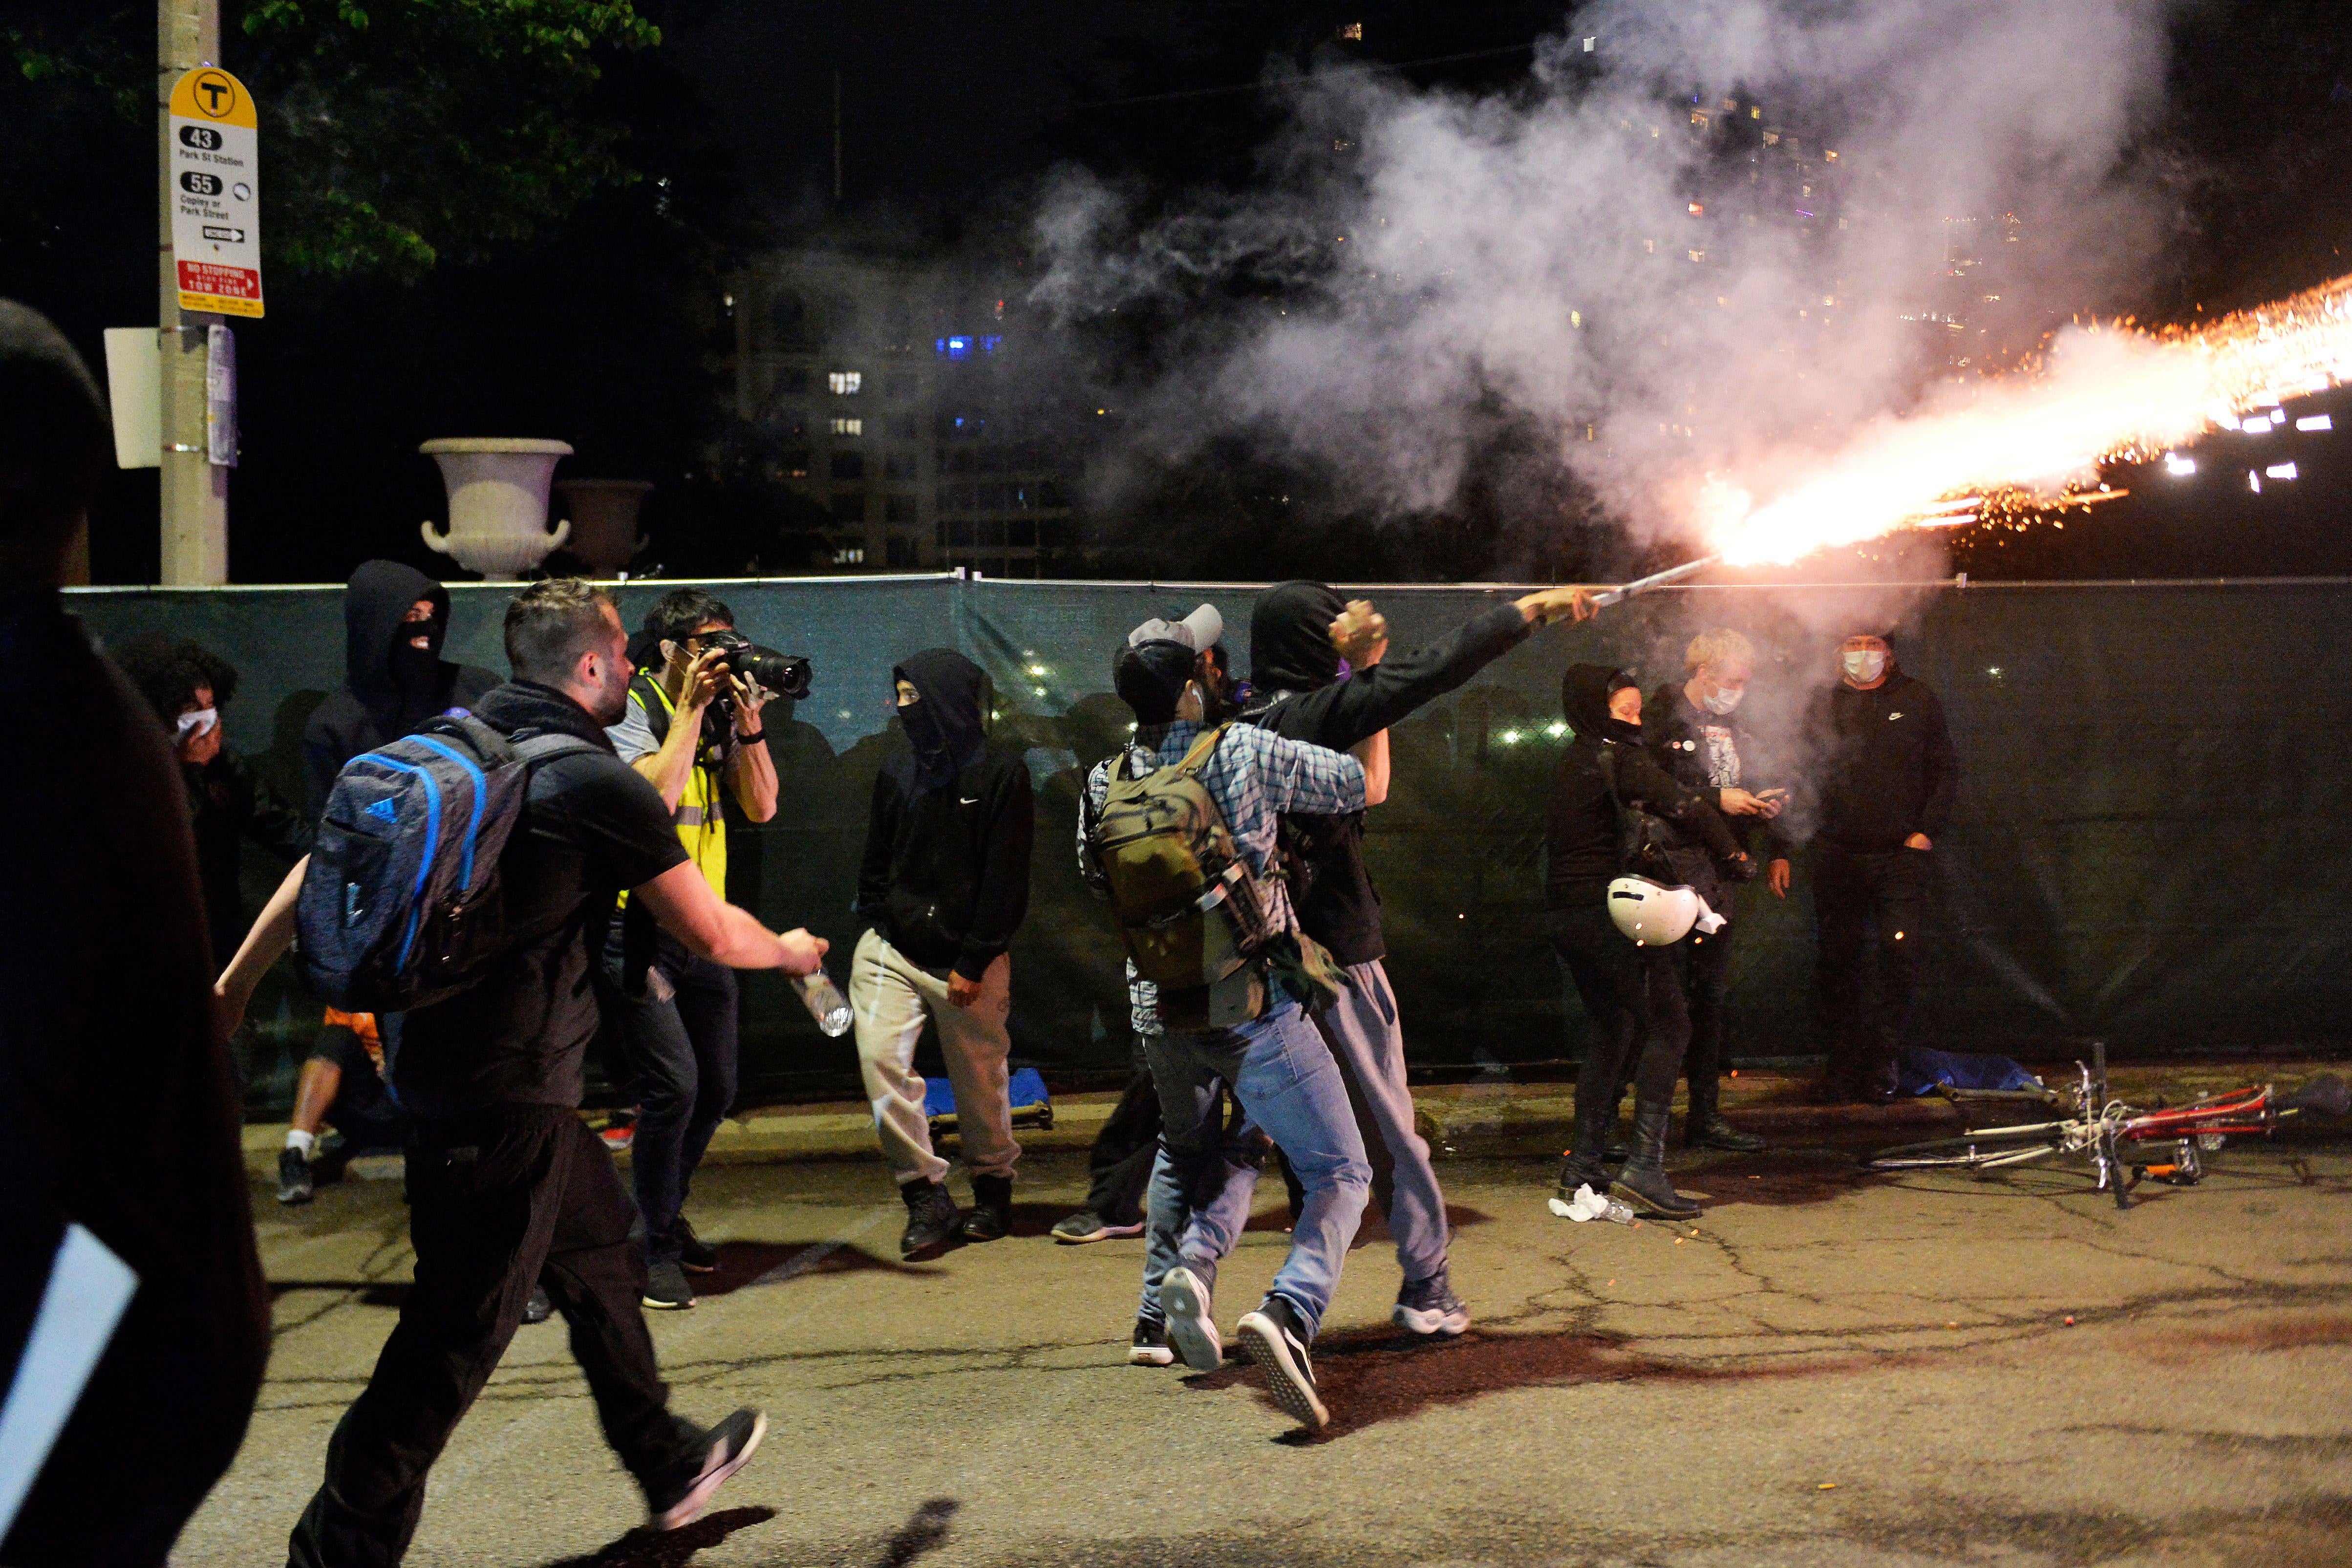 Protesters tackle a man setting off fireworks.